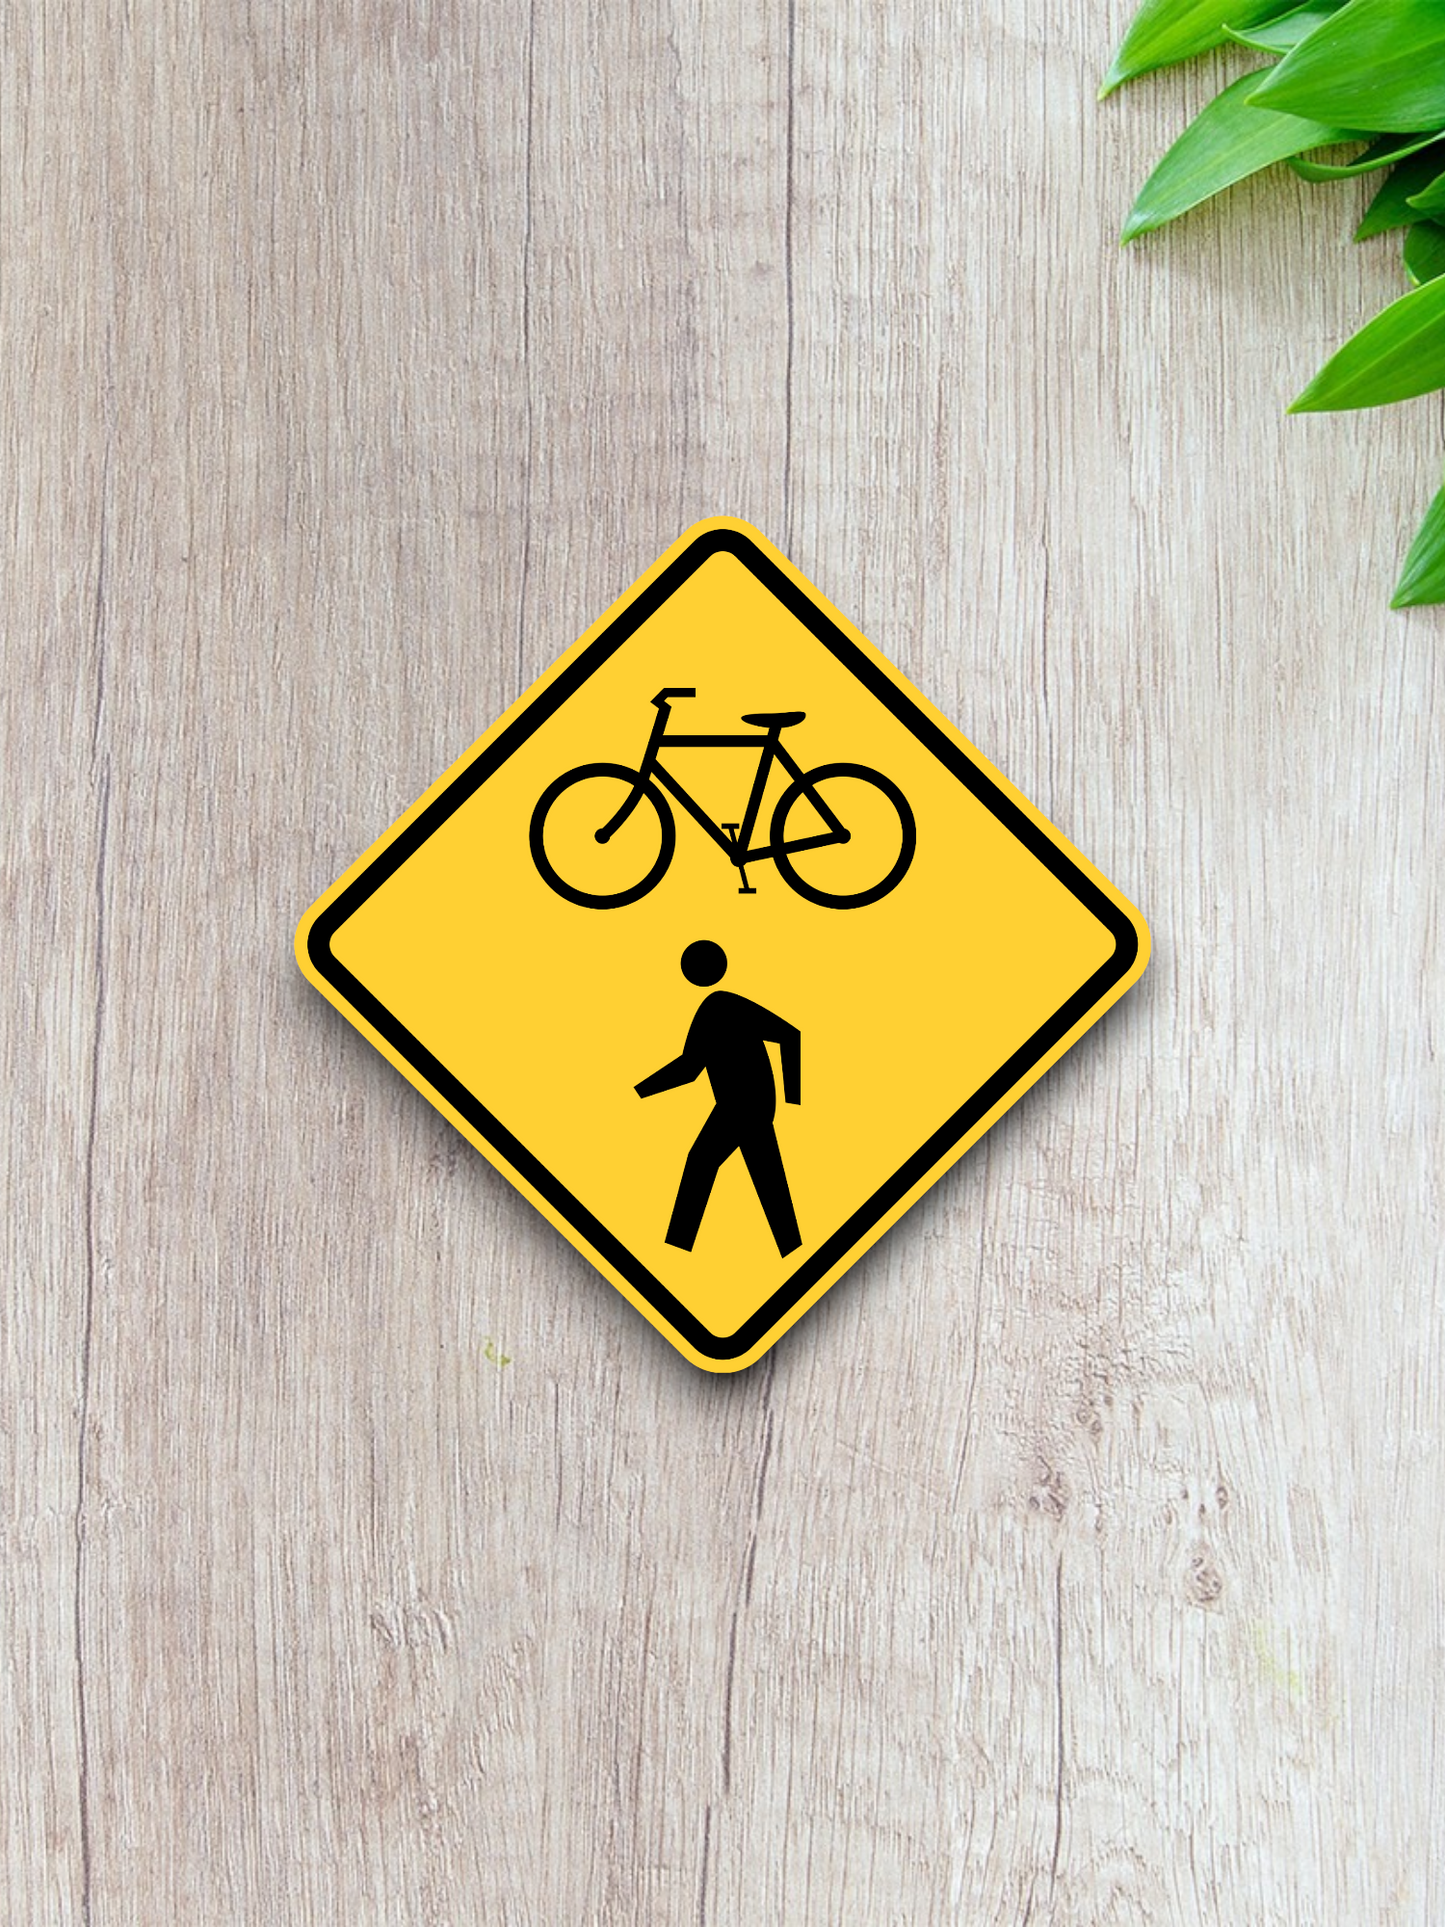 Bicycle and Pedestrian Road Sign Sticker